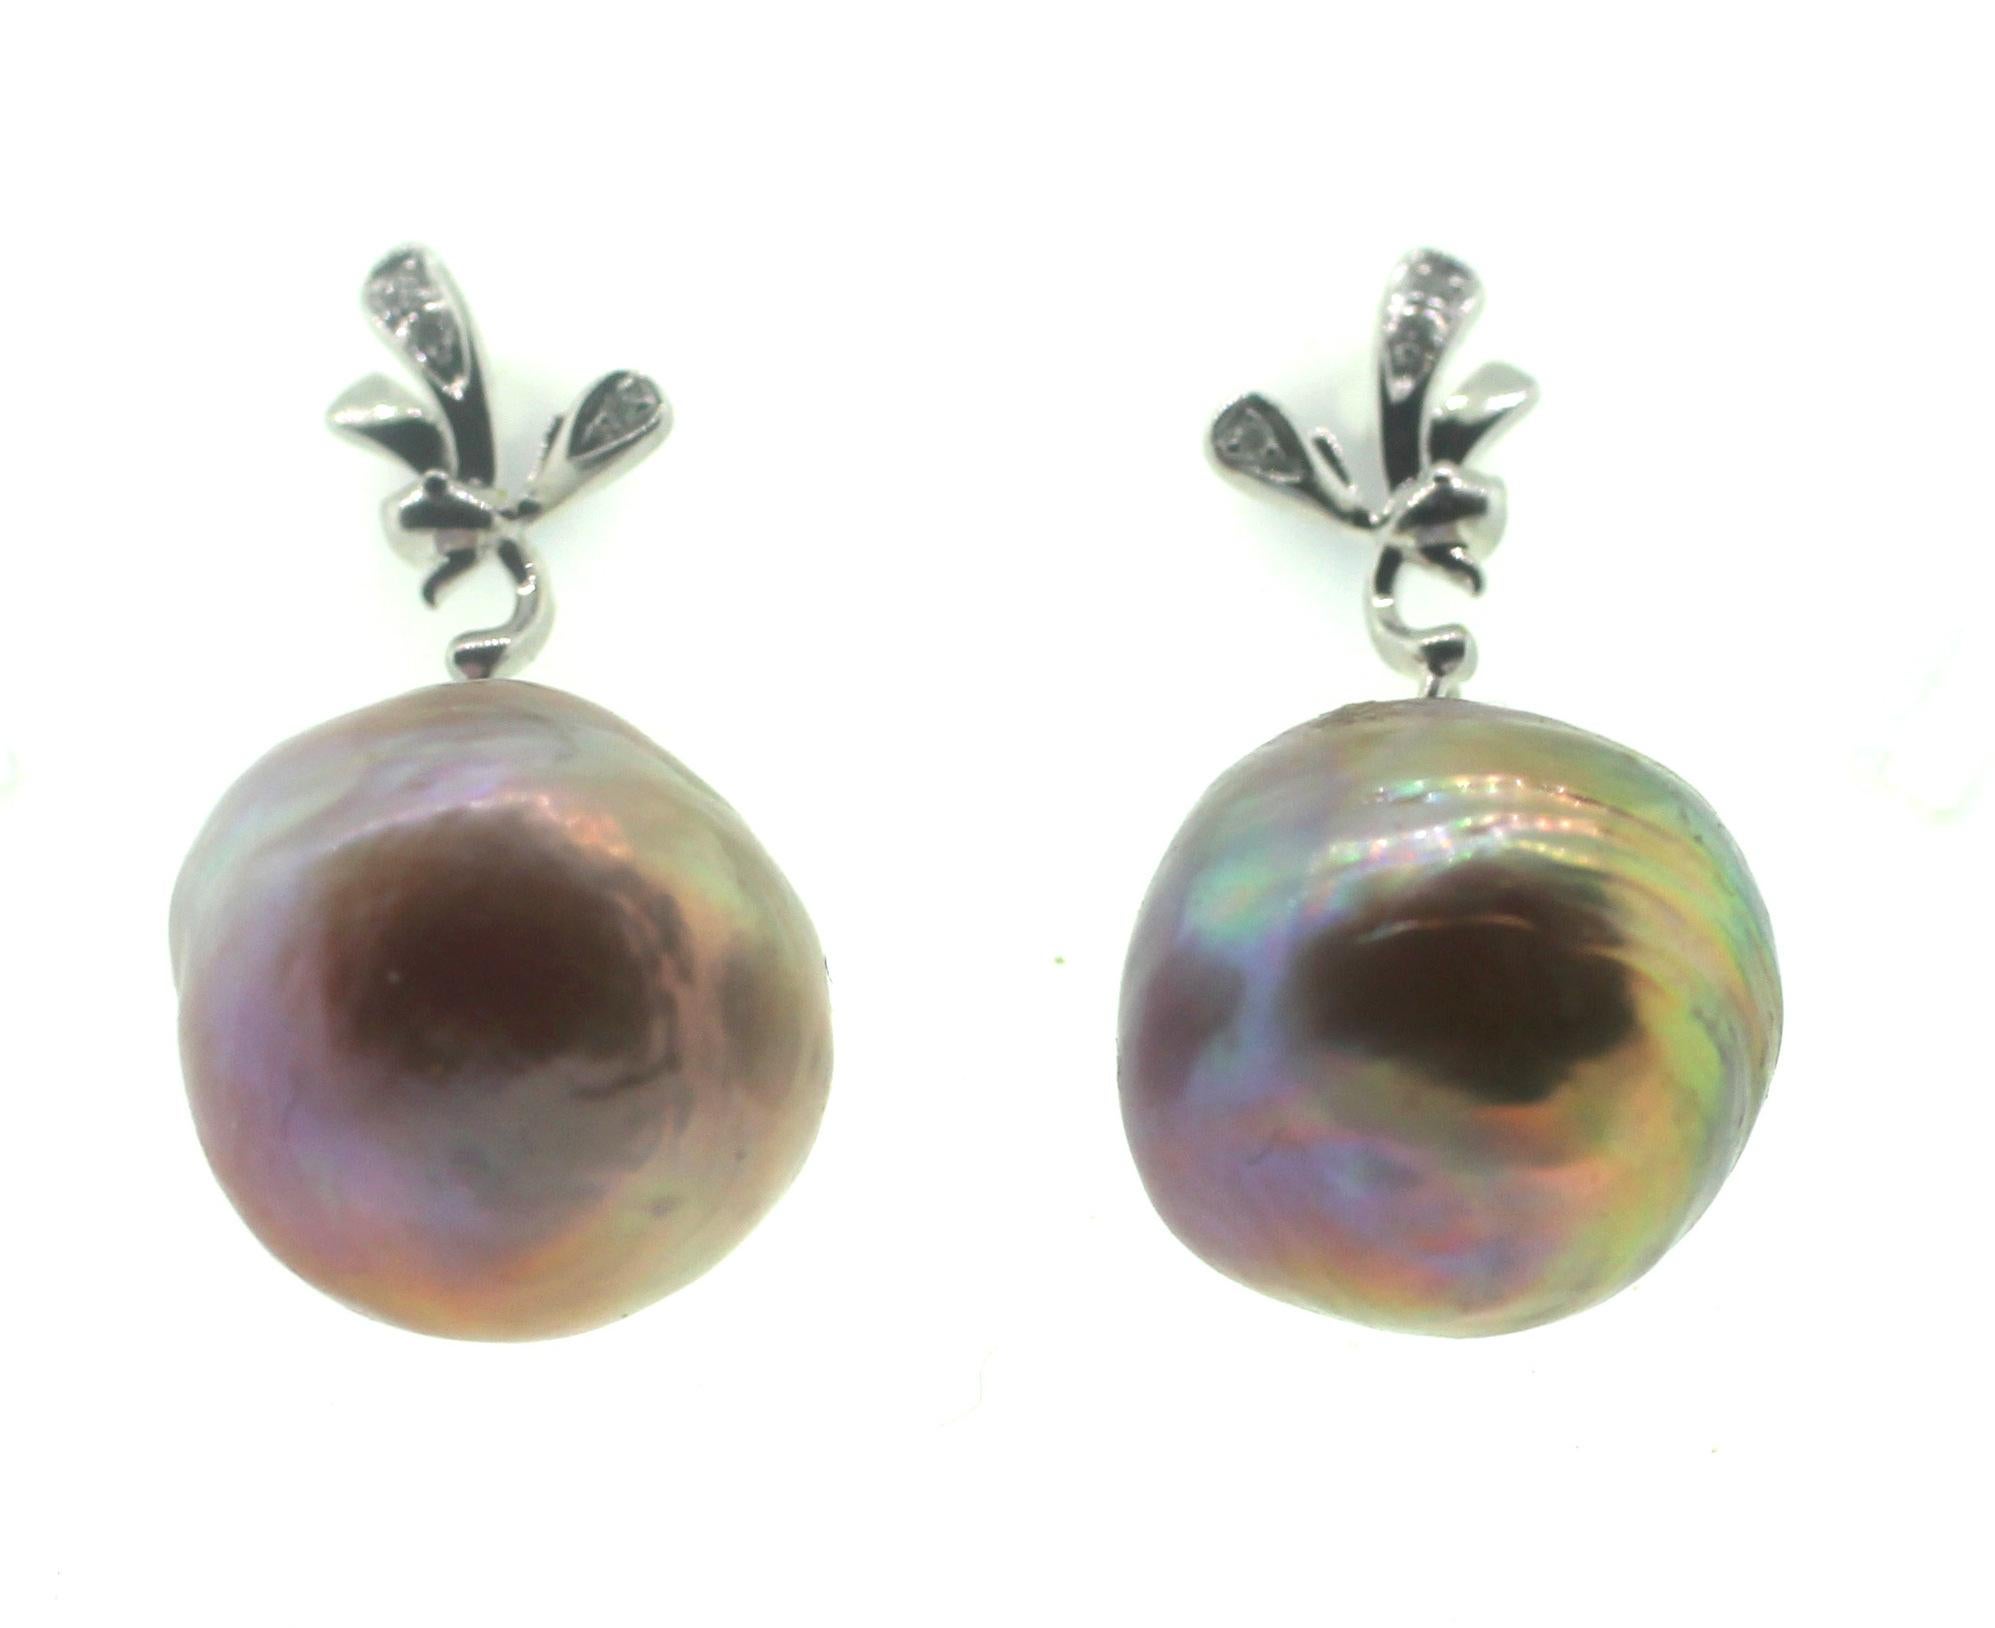 Hakimoto 18k White Gold Diamond Baroque Pearl Earrings In New Condition For Sale In New York, NY